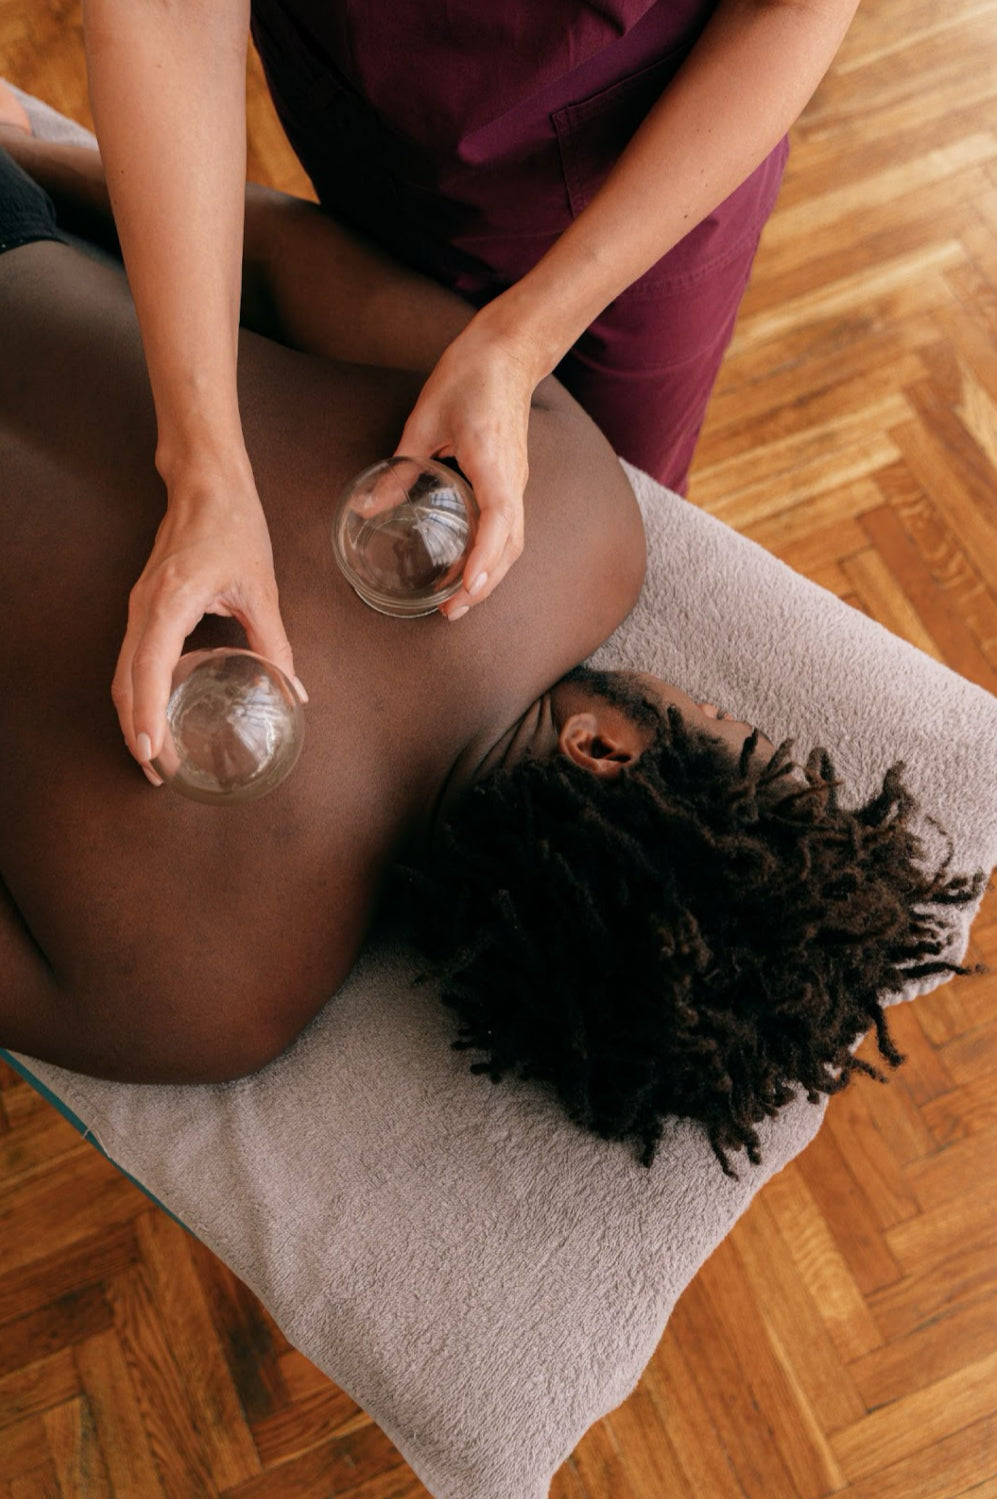 The Incomplete Picture of Cupping Therapy's Efficacy